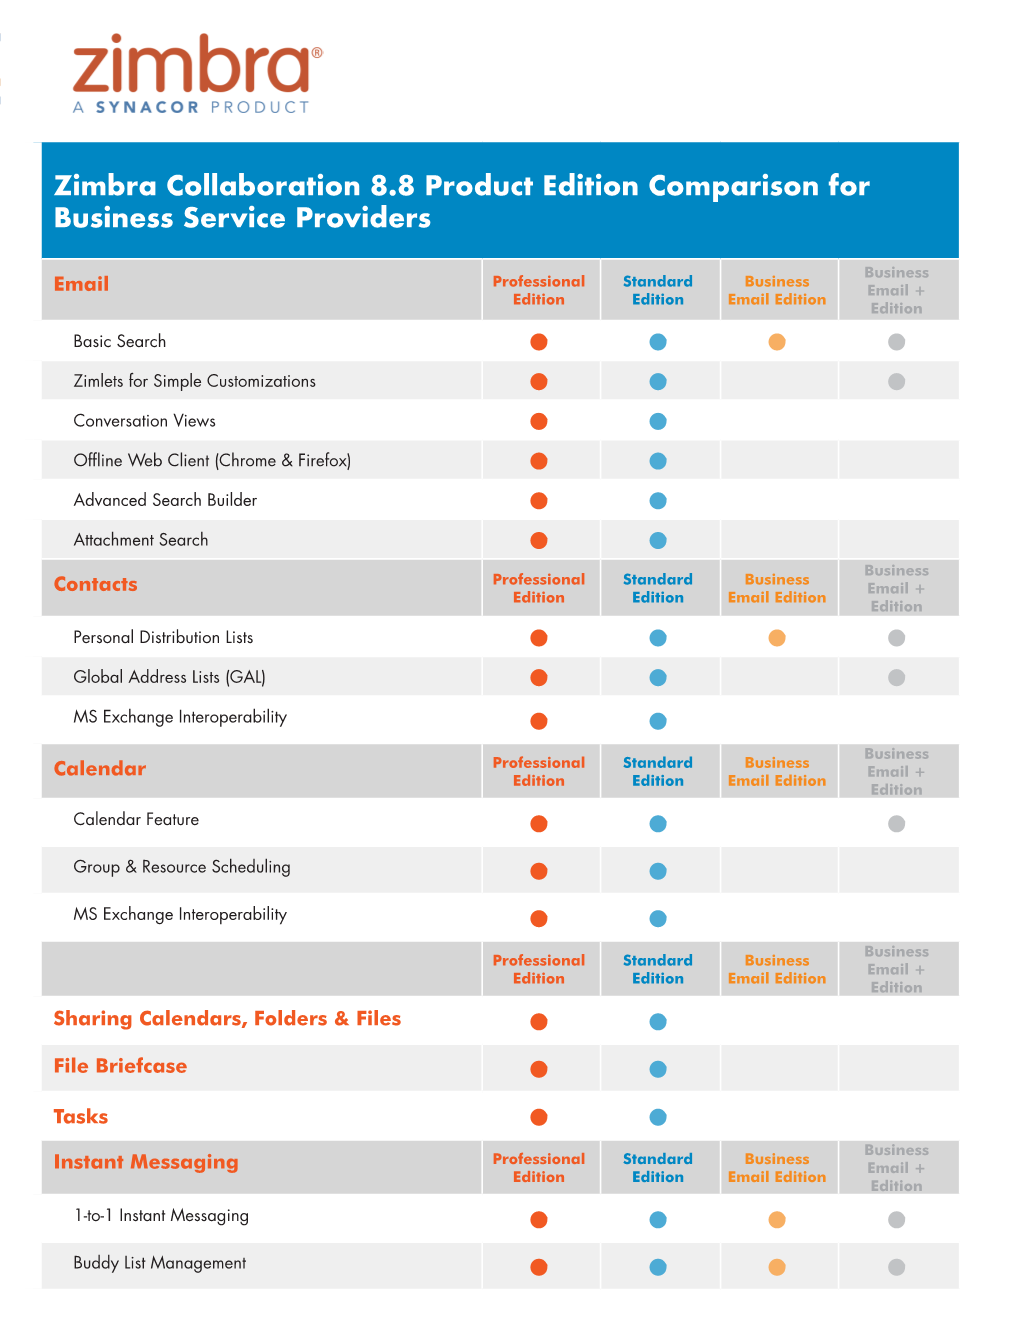 Zimbra Collaboration 8.8 Product Edition Comparison for Business Service Providers